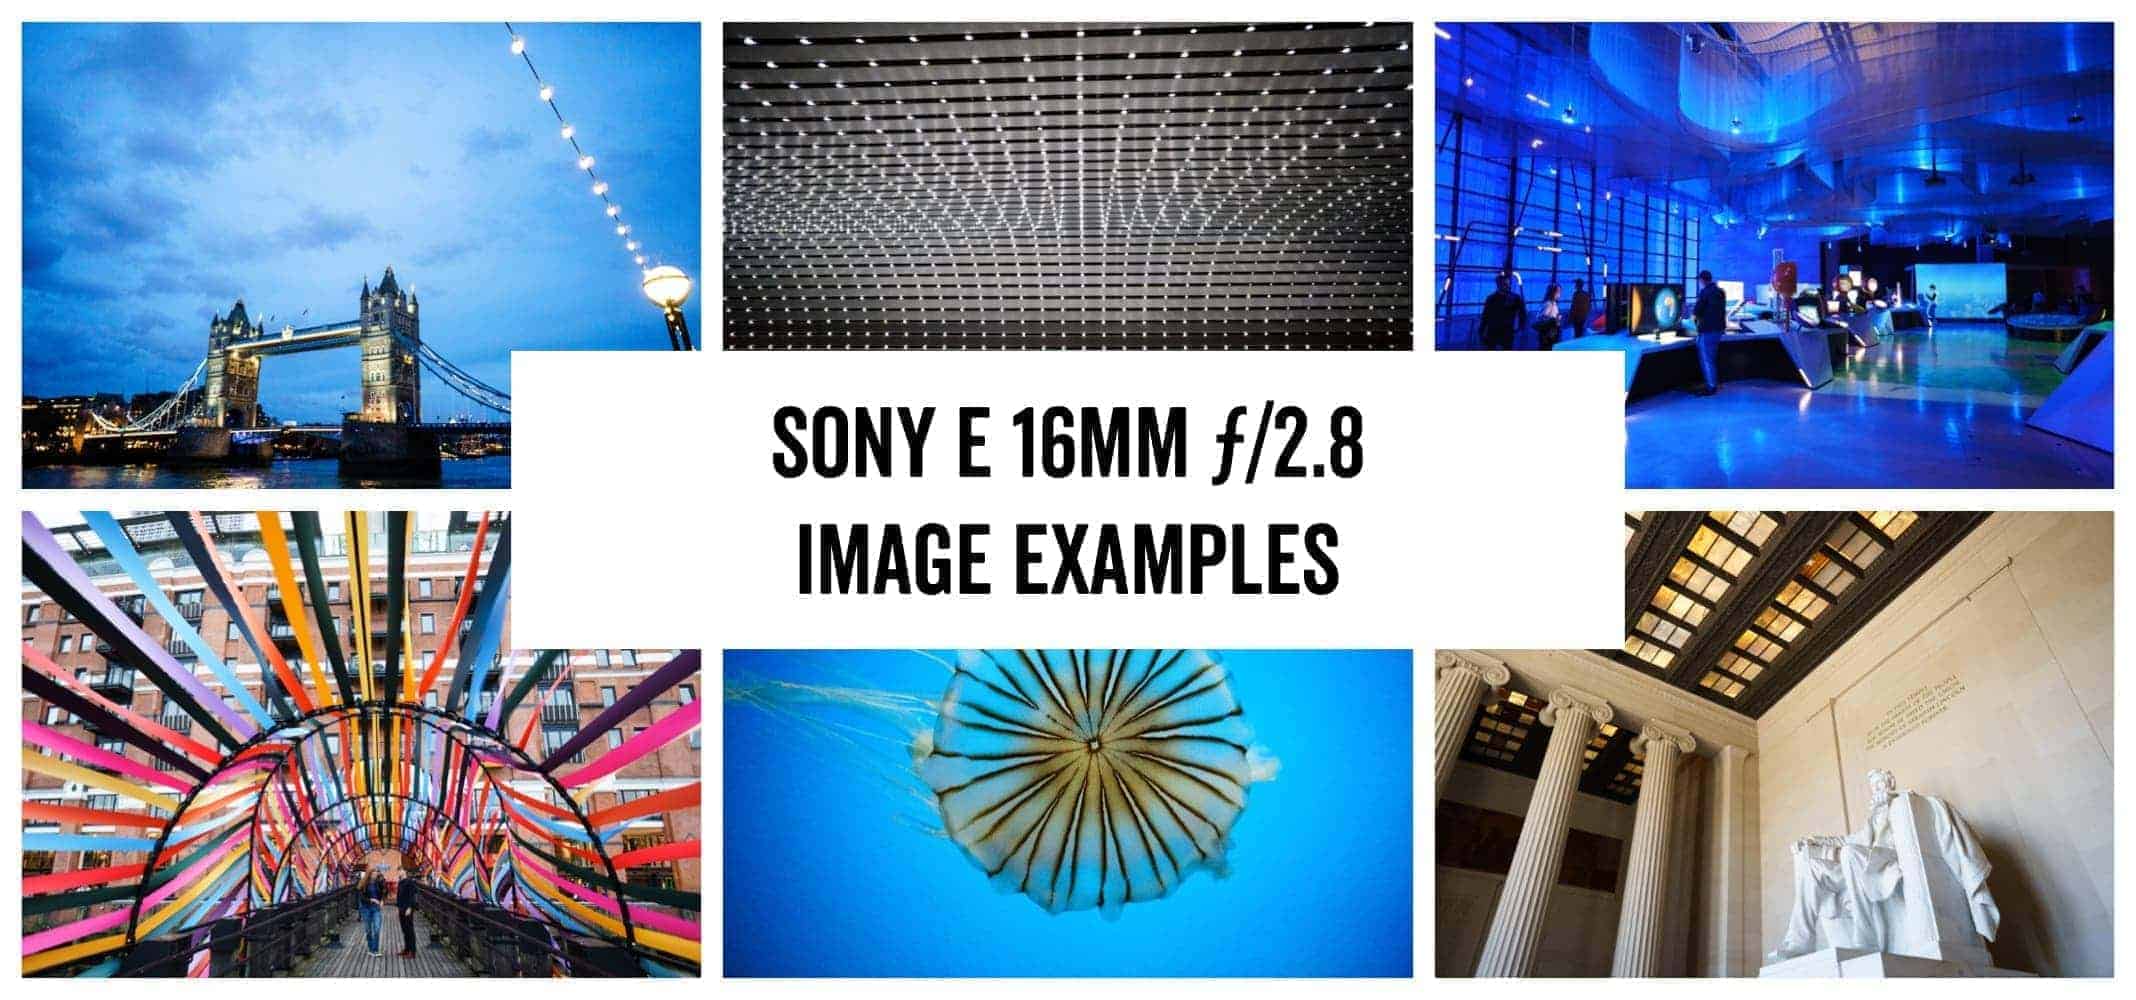 Sony E 16mm ƒ/2.8 Wide-Angle Prime Lens Sample Images